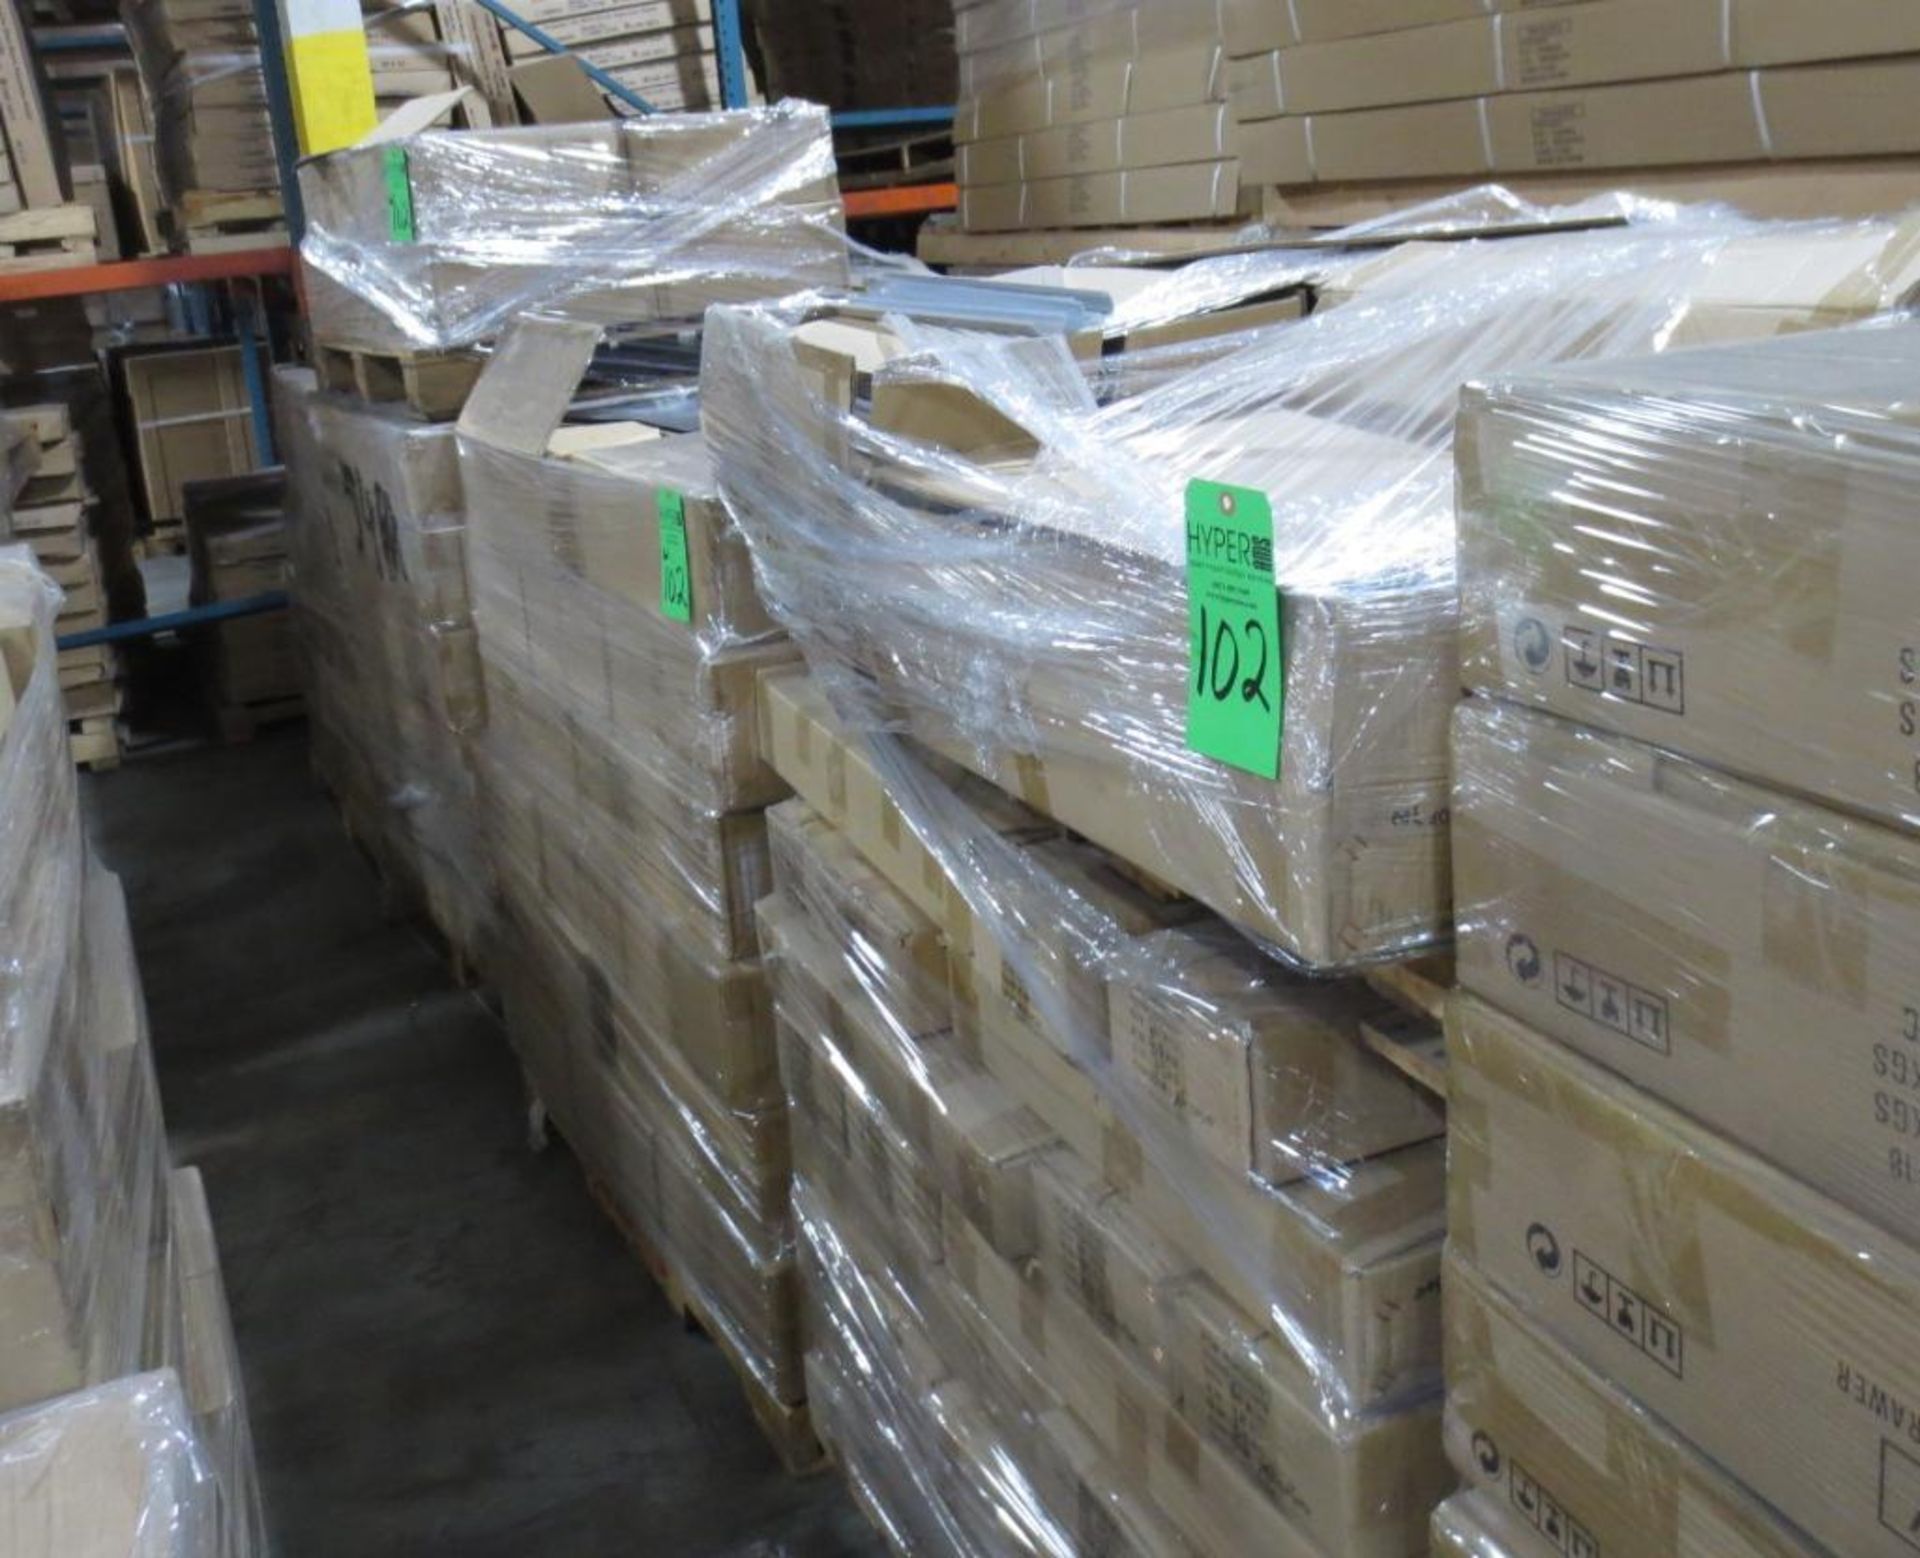 Appx 80 Boxes of Trim 200579, Appx 60 Boxes Liners 22,40 X 15.30" 2000576, Appx 36 Boxes Liners 100